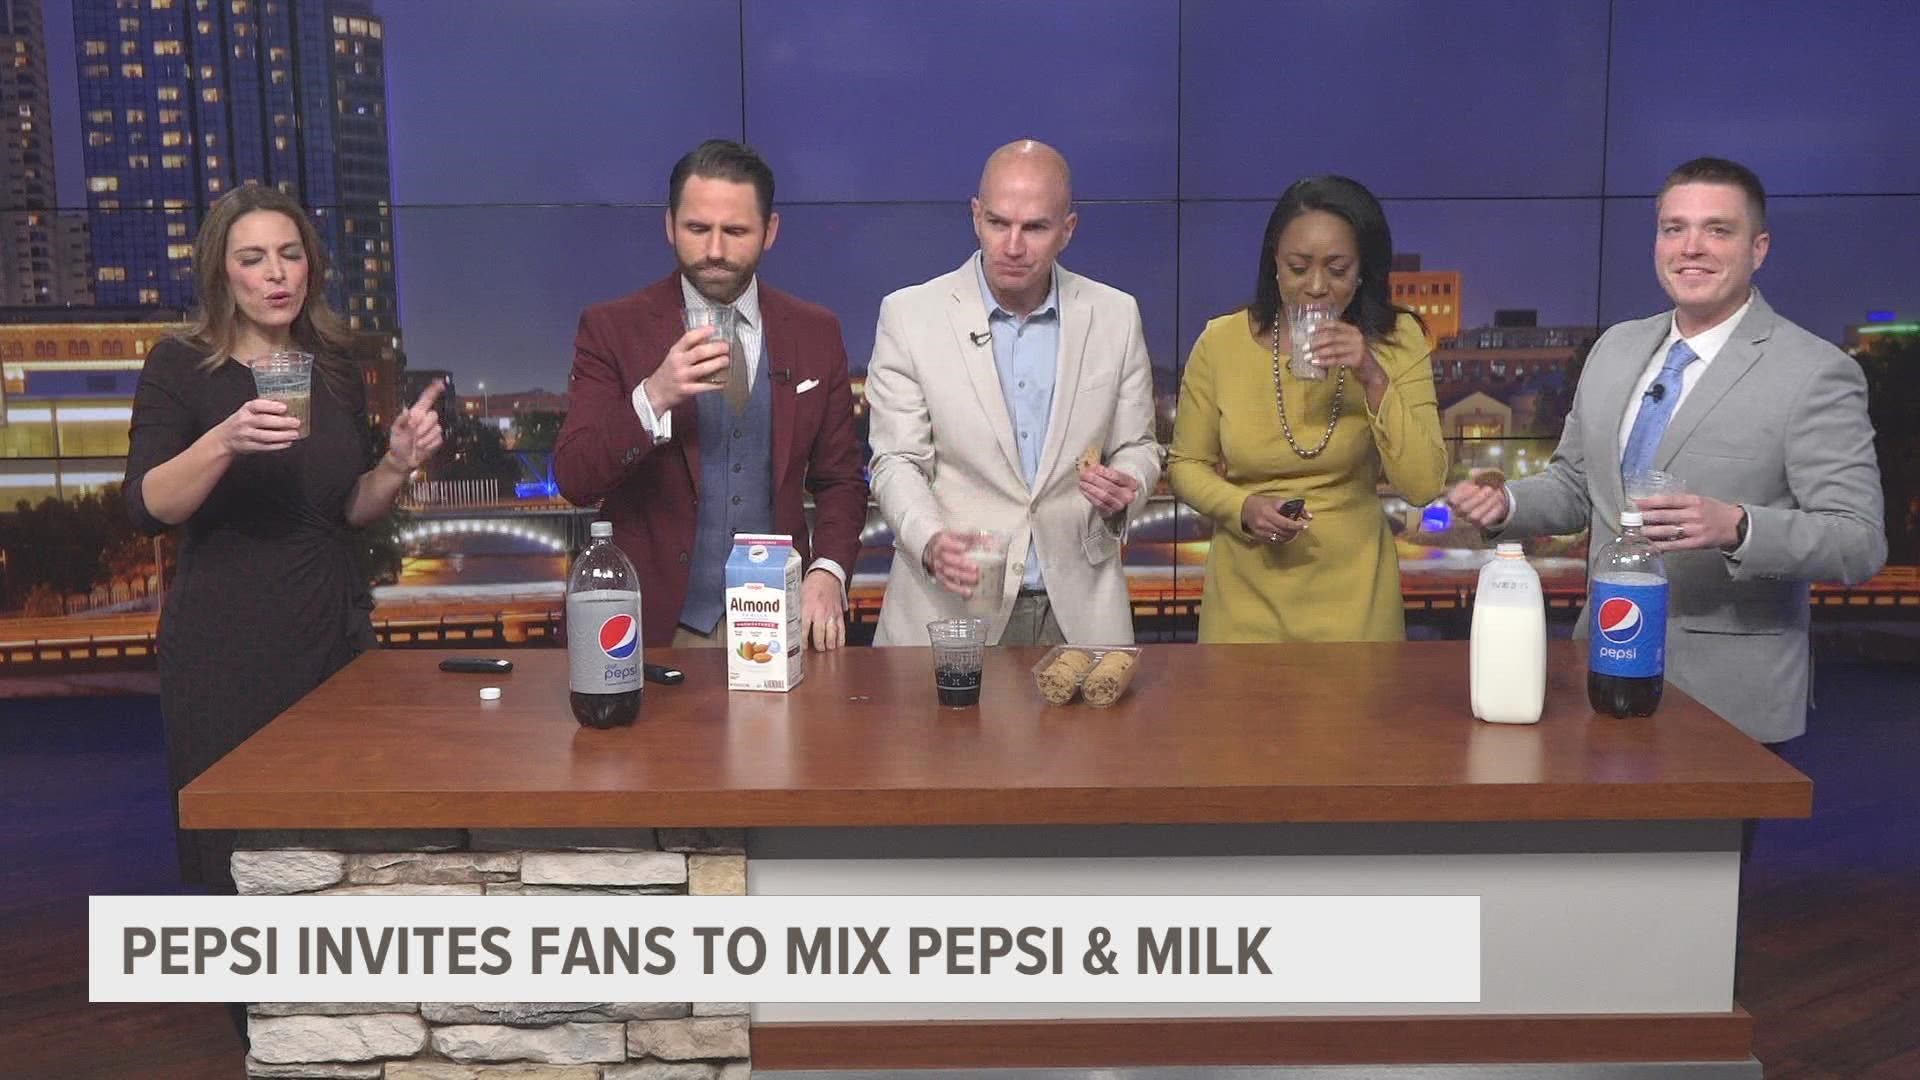 Pepsi milk, also known as "pilk," has been trending online. Our morning anchors gave it a shot to see if it lives up to the hype.